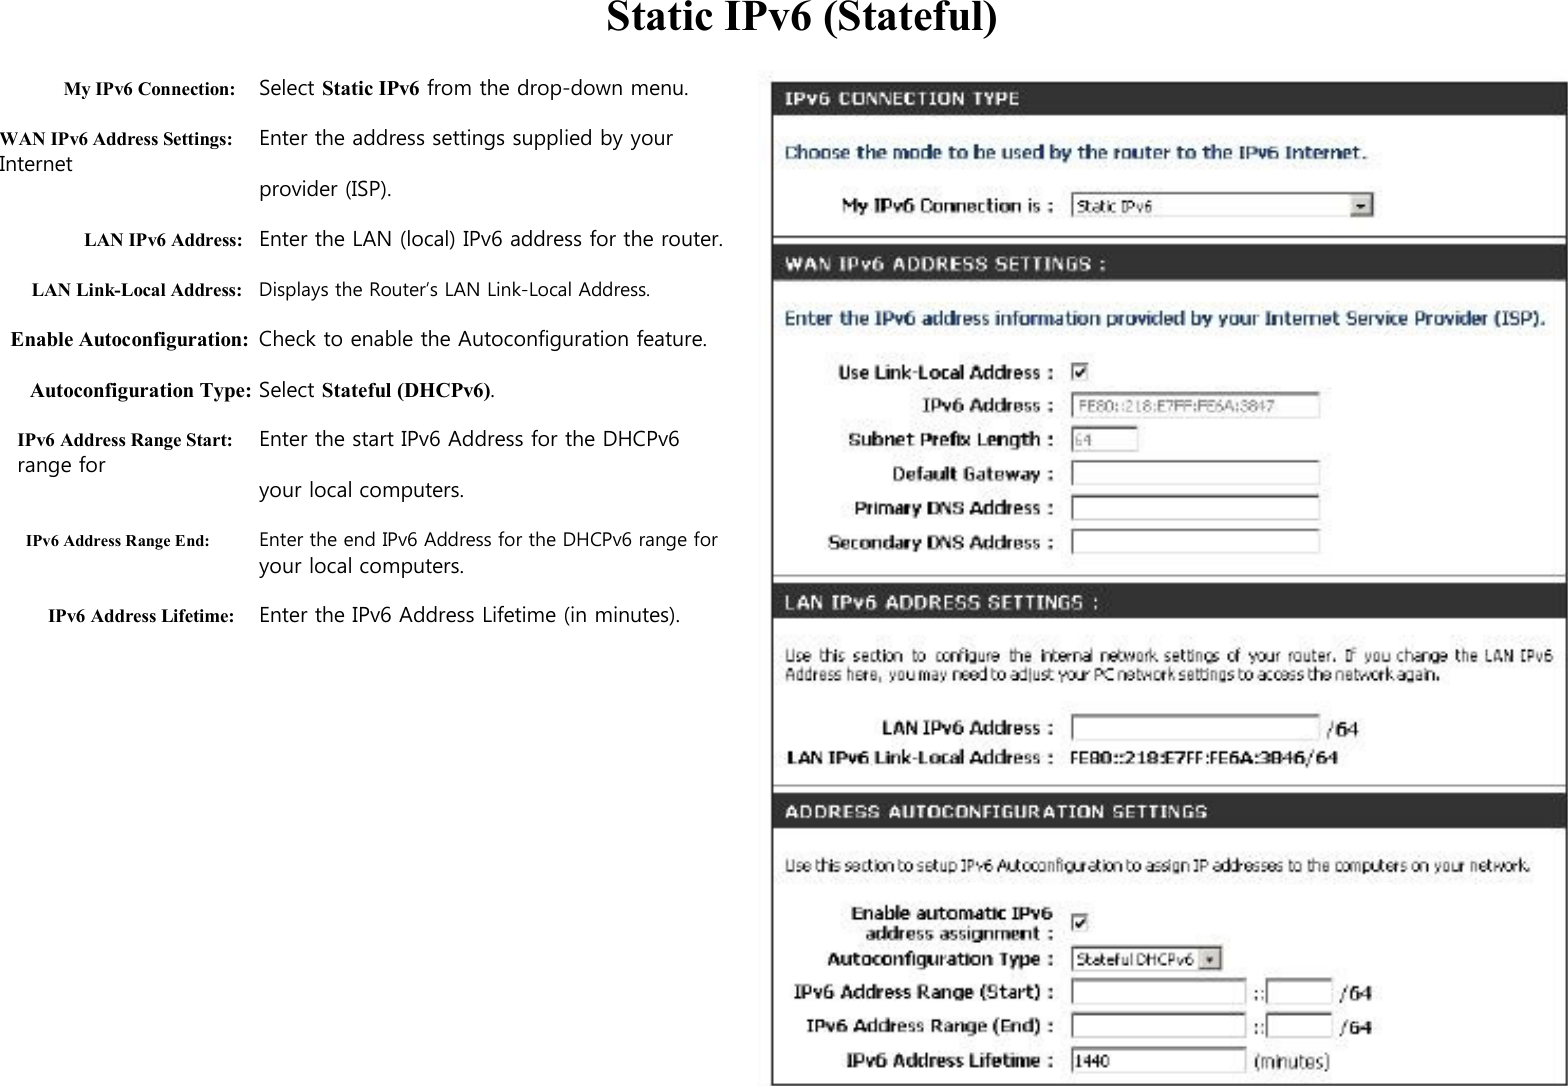   Static IPv6 (Stateful)  My IPv6 Connection: Select Static IPv6 from the drop-down menu.  WAN IPv6 Address Settings: Enter the address settings supplied by your Internet   provider (ISP).  LAN IPv6 Address: Enter the LAN (local) IPv6 address for the router.  LAN Link-Local Address: Displays the Router’s LAN Link-Local Address.  Enable Autoconfiguration: Check to enable the Autoconfiguration feature.  Autoconfiguration Type: Select Stateful (DHCPv6).  IPv6 Address Range Start: Enter the start IPv6 Address for the DHCPv6 range for your local computers.  IPv6 Address Range End: Enter the end IPv6 Address for the DHCPv6 range for your local computers.  IPv6 Address Lifetime: Enter the IPv6 Address Lifetime (in minutes).                                 